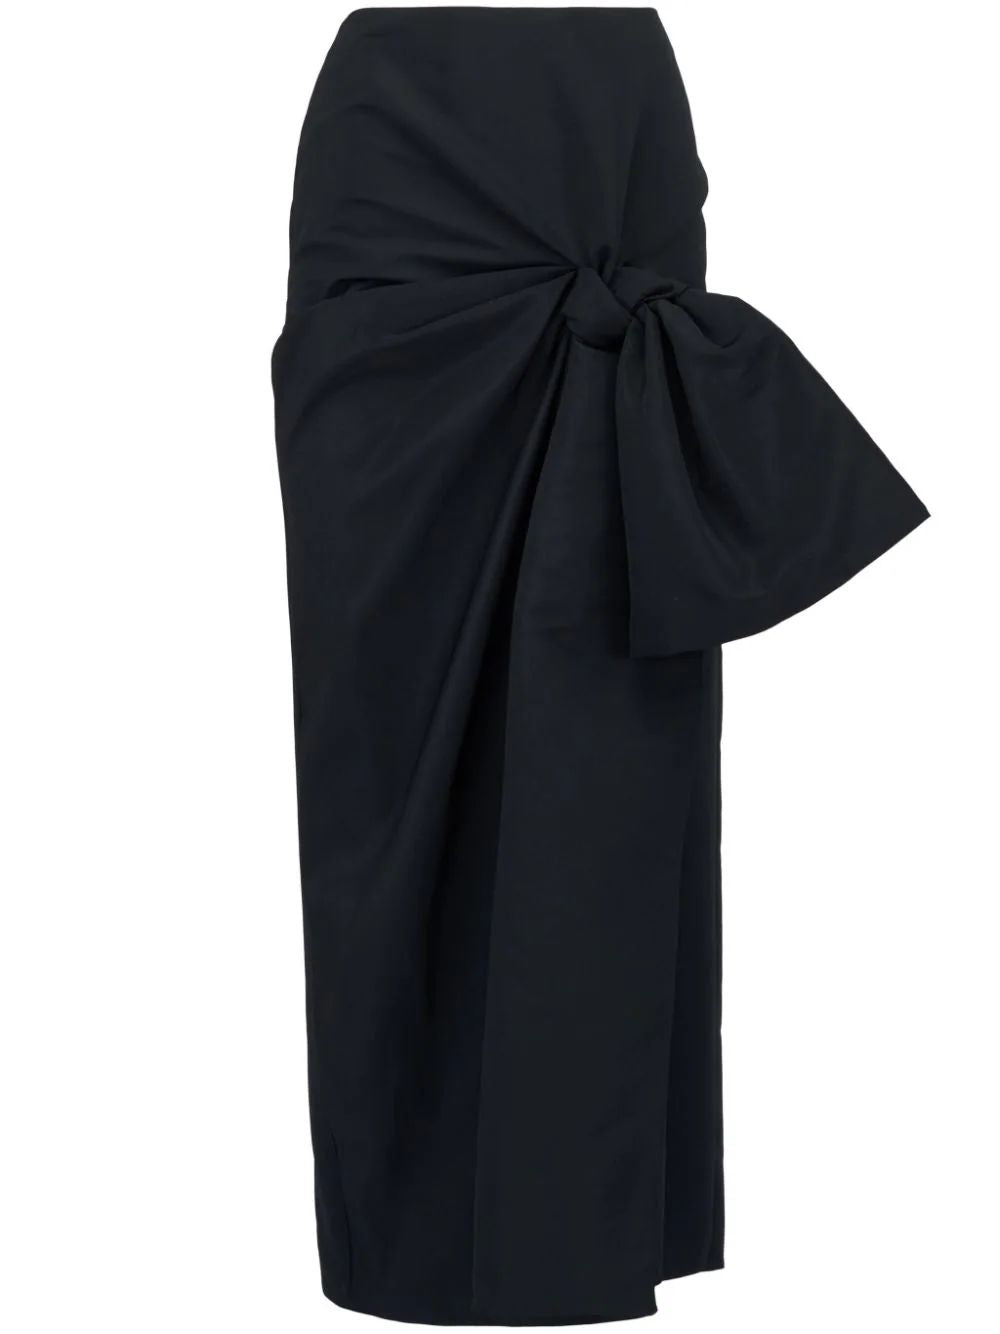 Shop Alexander Mcqueen Black Pencil Skirt With Bow For Women